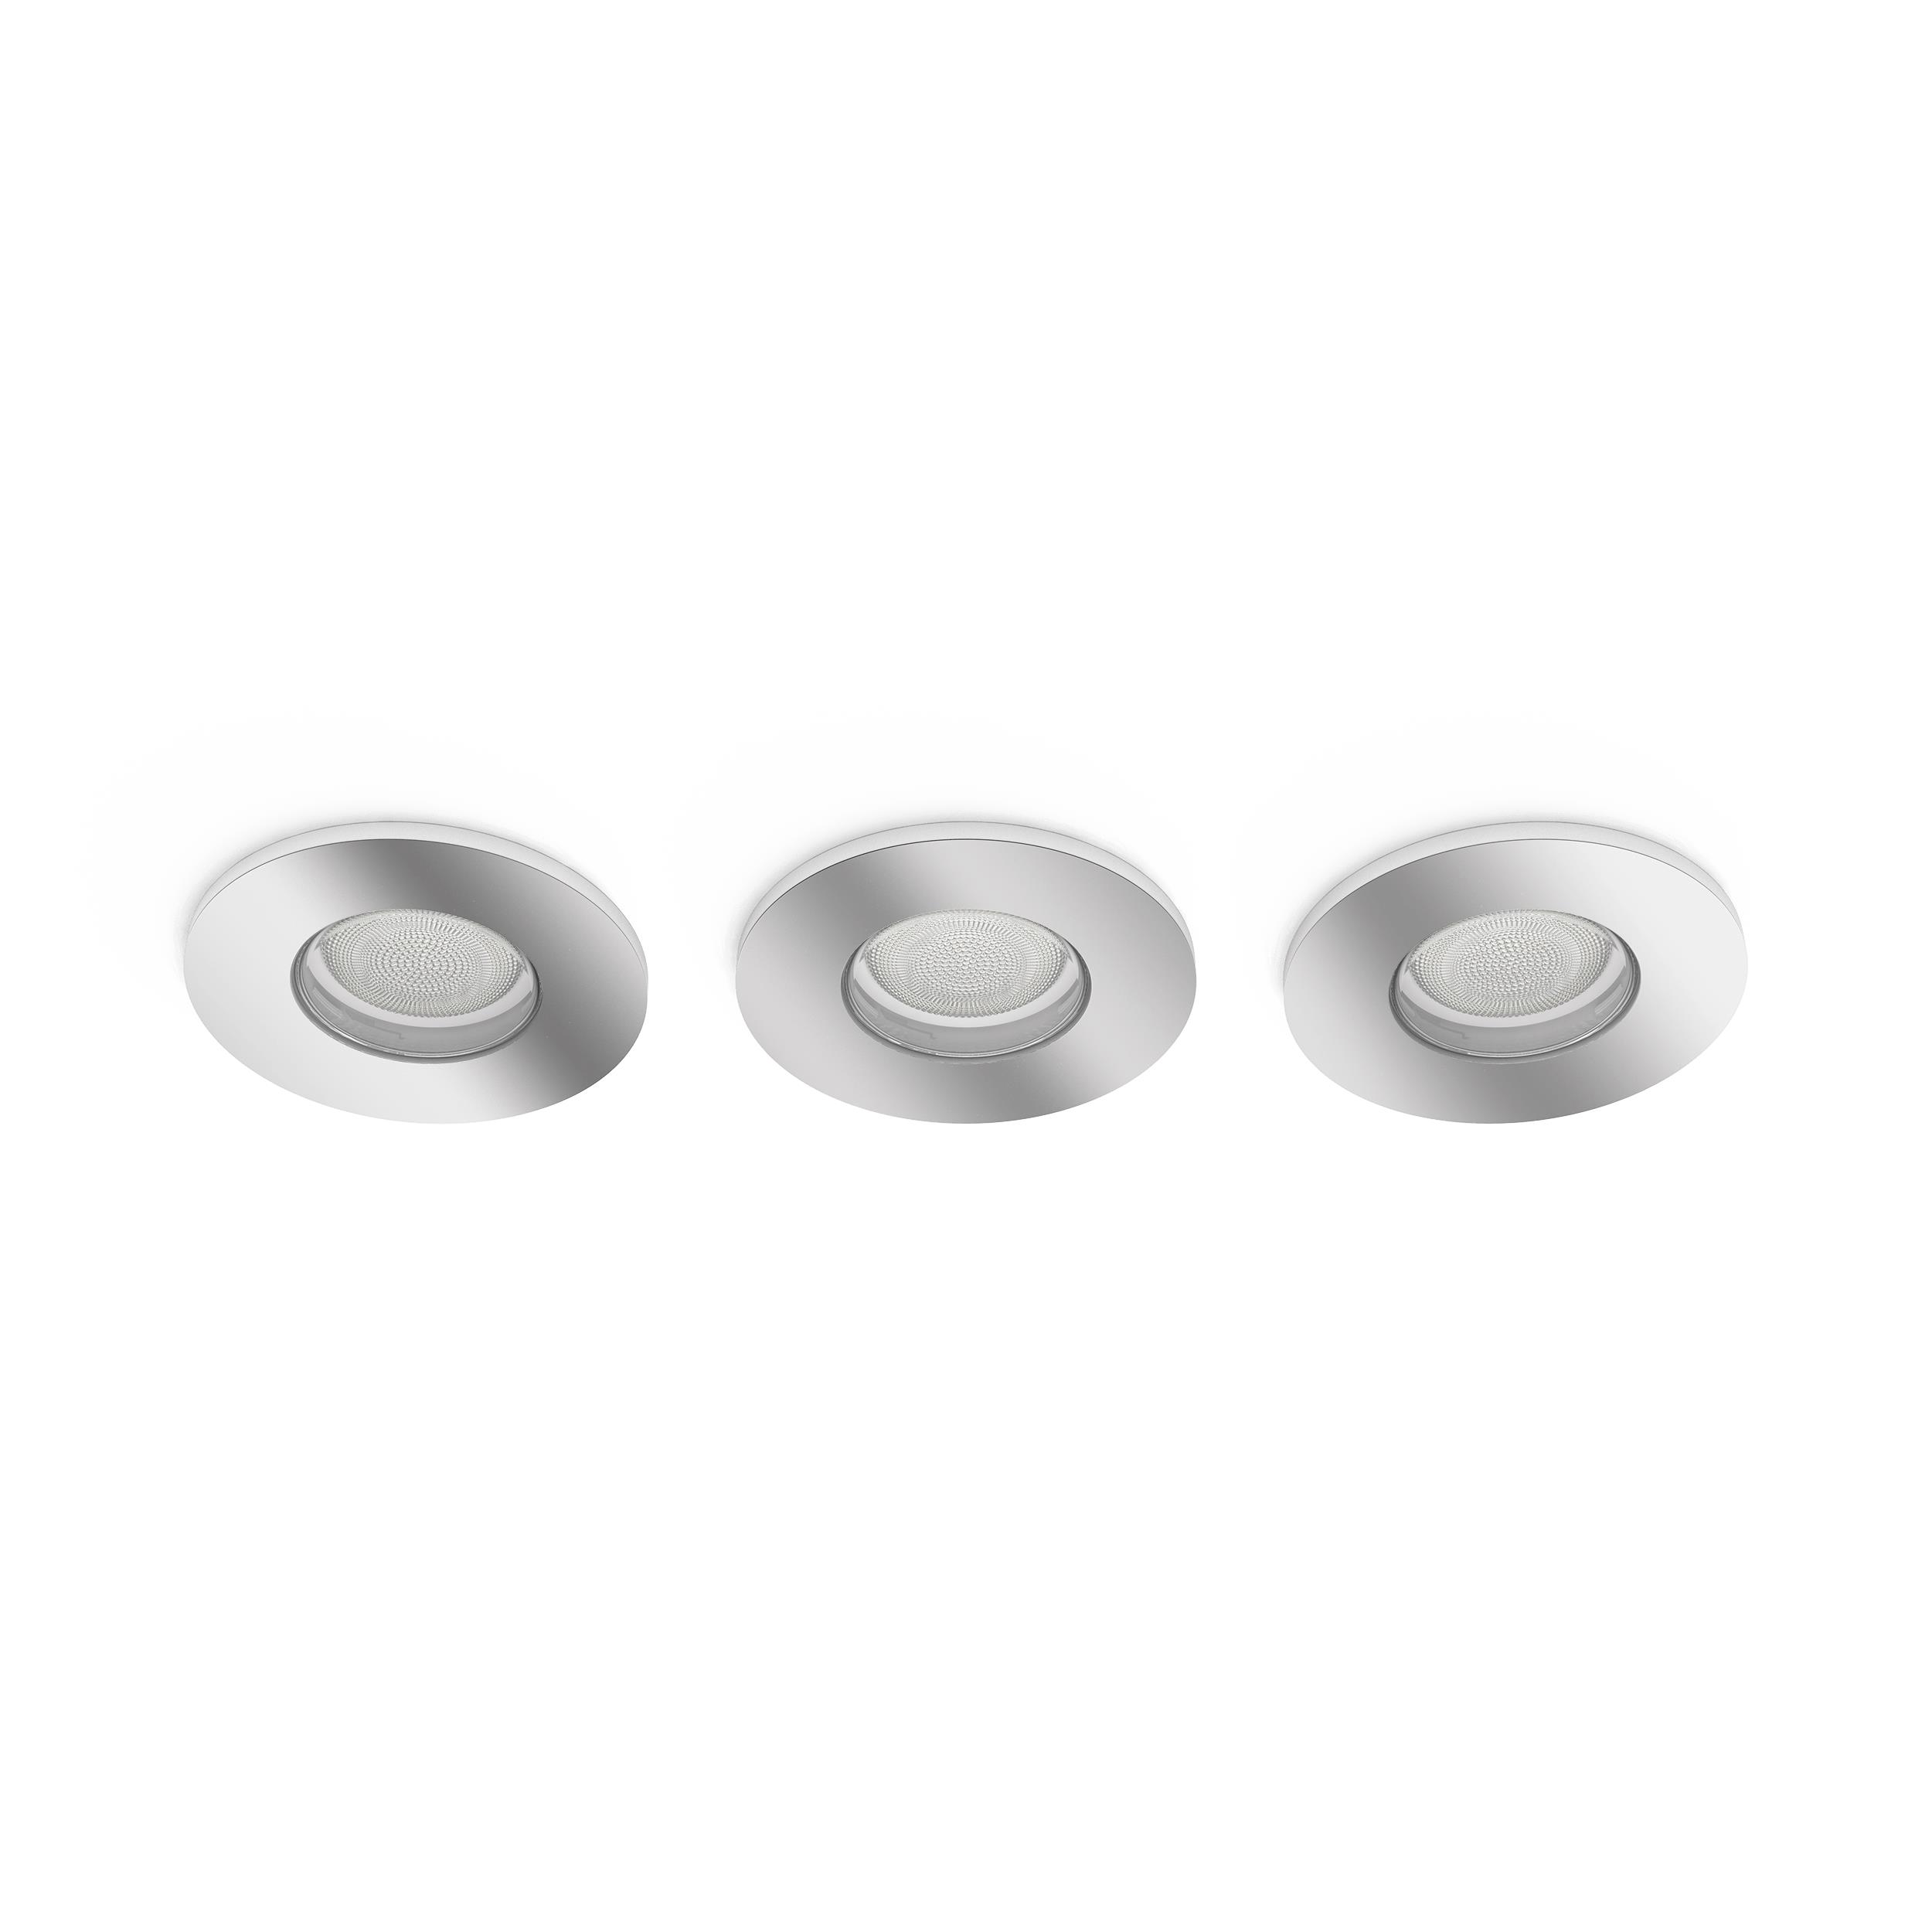 Spot incastrat Philips Hue alb and Color Ambiance LED Xamento Set of 3 silver 3x 350lm IP44